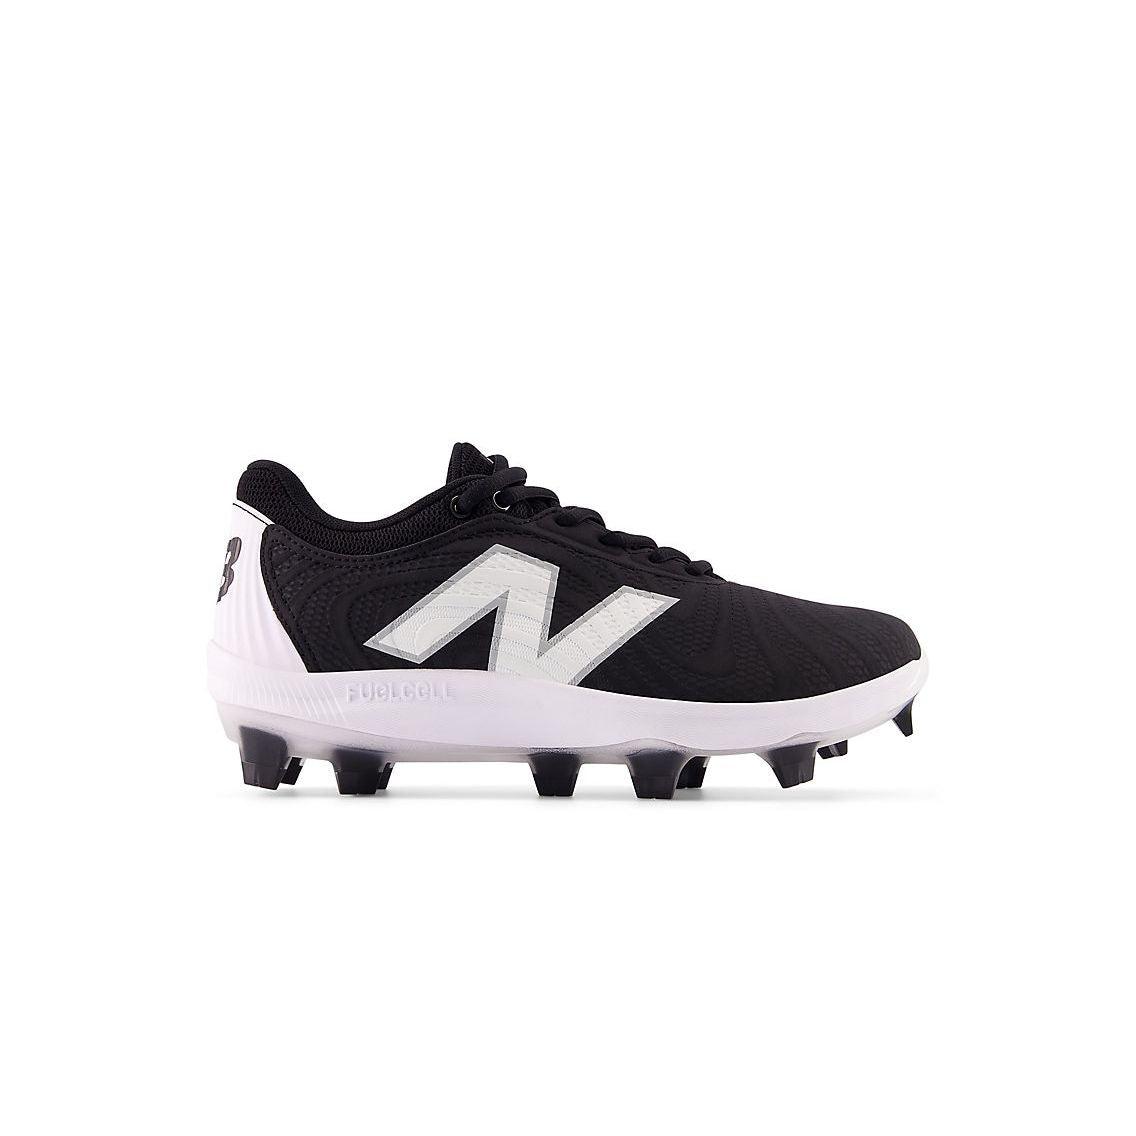 New Balance Women's FuelCell FUSE v4 Molded Fastpitch Softball Cleats - Black/Optic White - SPFUSEK4 - Smash It Sports